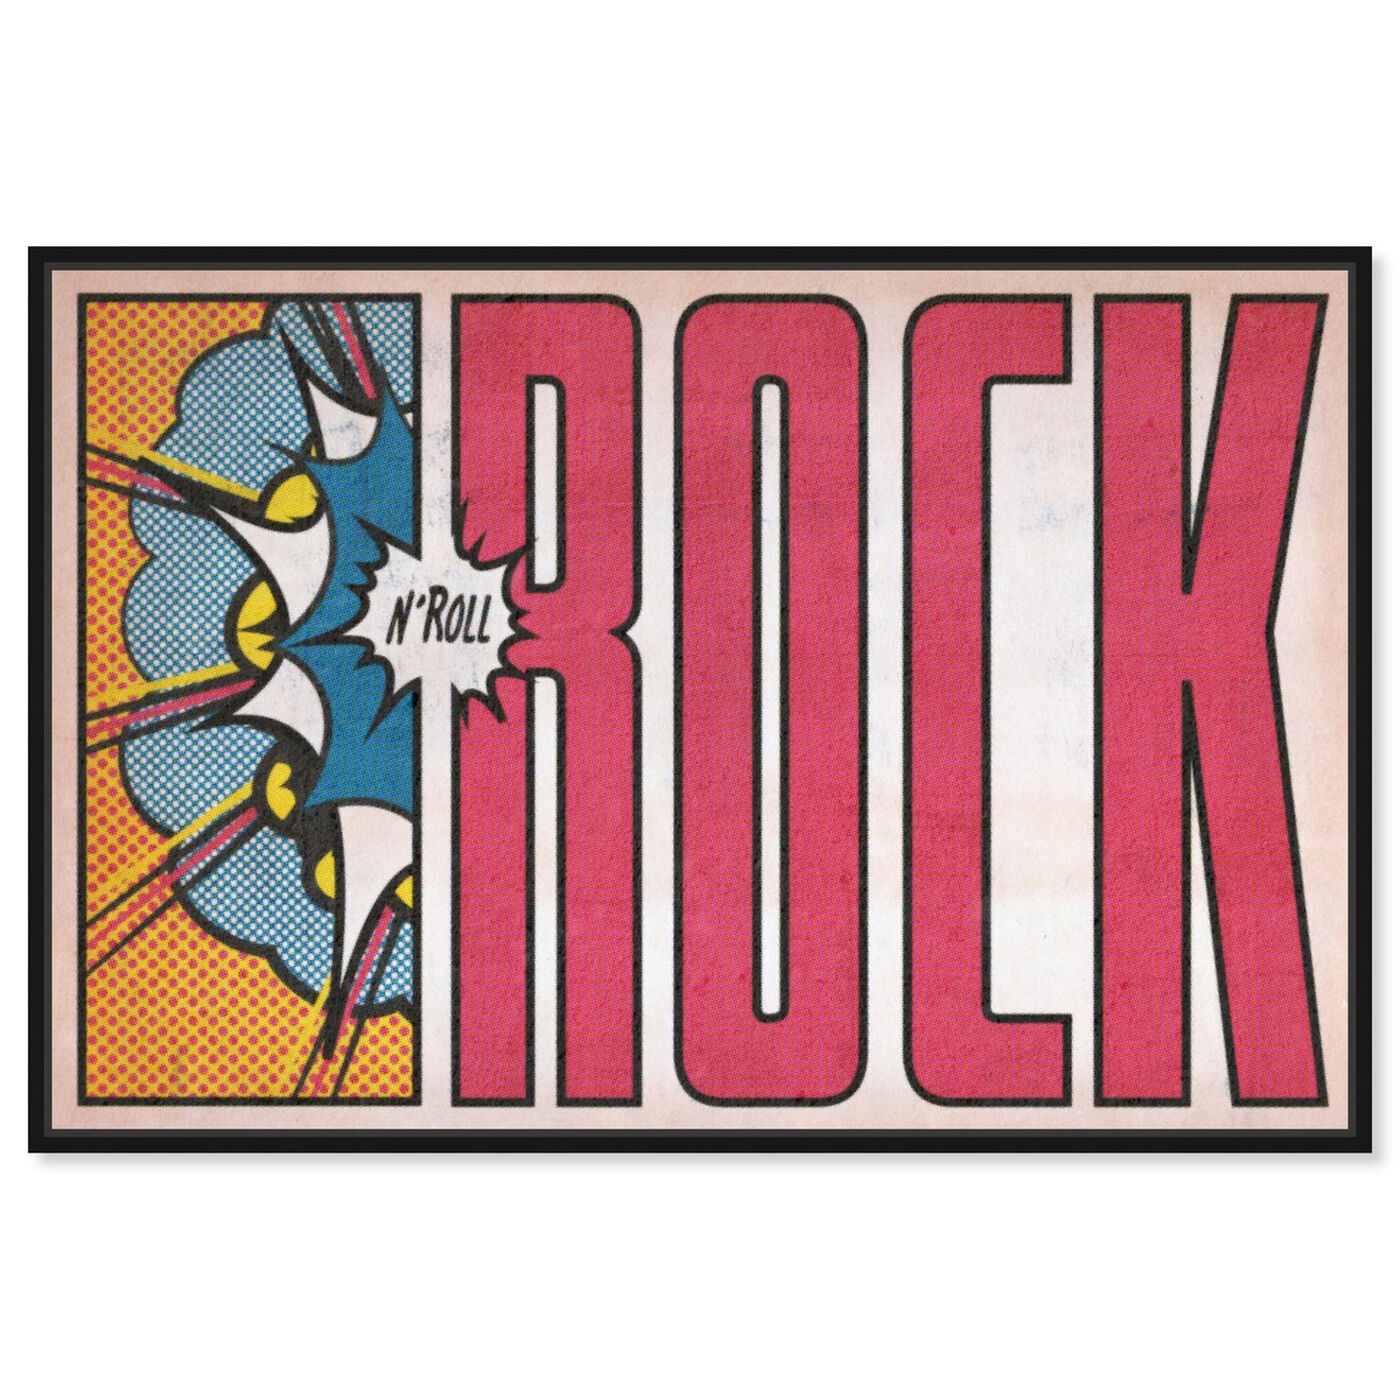 Front view of Rock N' Roll featuring advertising and comics art.